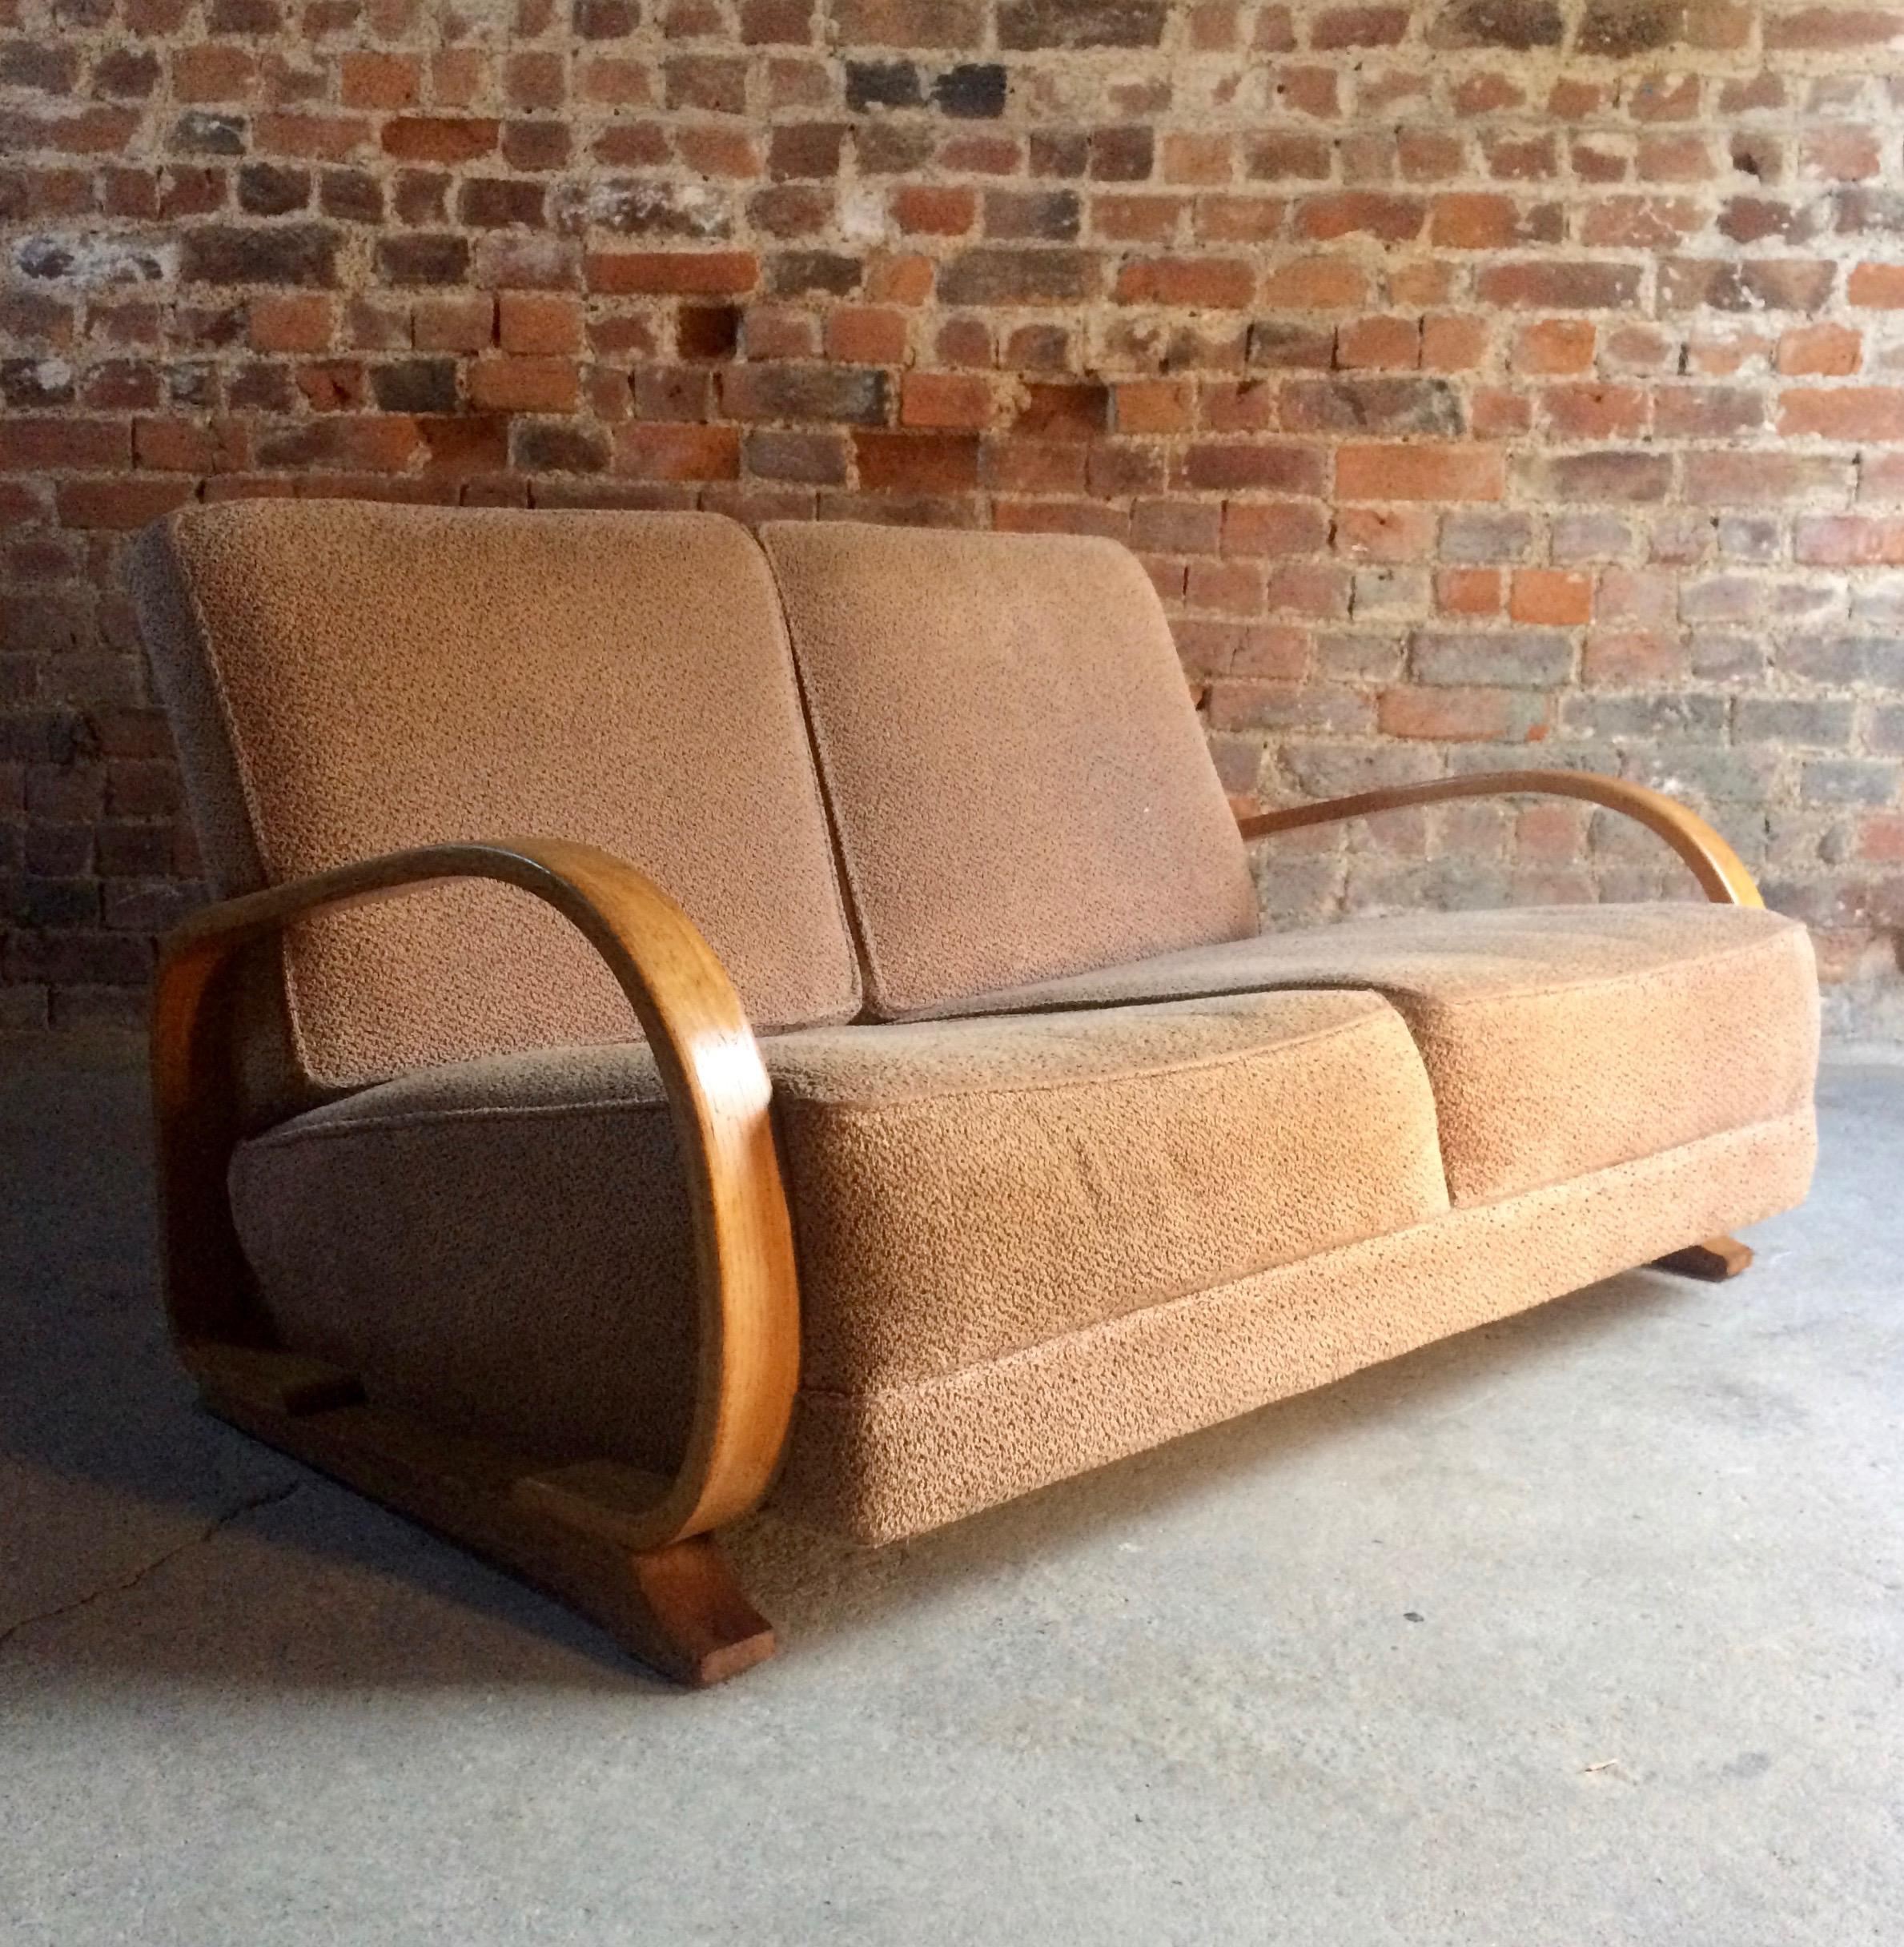 Gilbert Rohde for Heywood-Wakefield, a stunning rare two-seat Art Deco Streamline sofa, circa 1930s, with bentwood arms and neutral fabric upholstery, One of Gilbert Rohde's best Art Deco designs for Heywood-Wakefield, one of the finest examples of